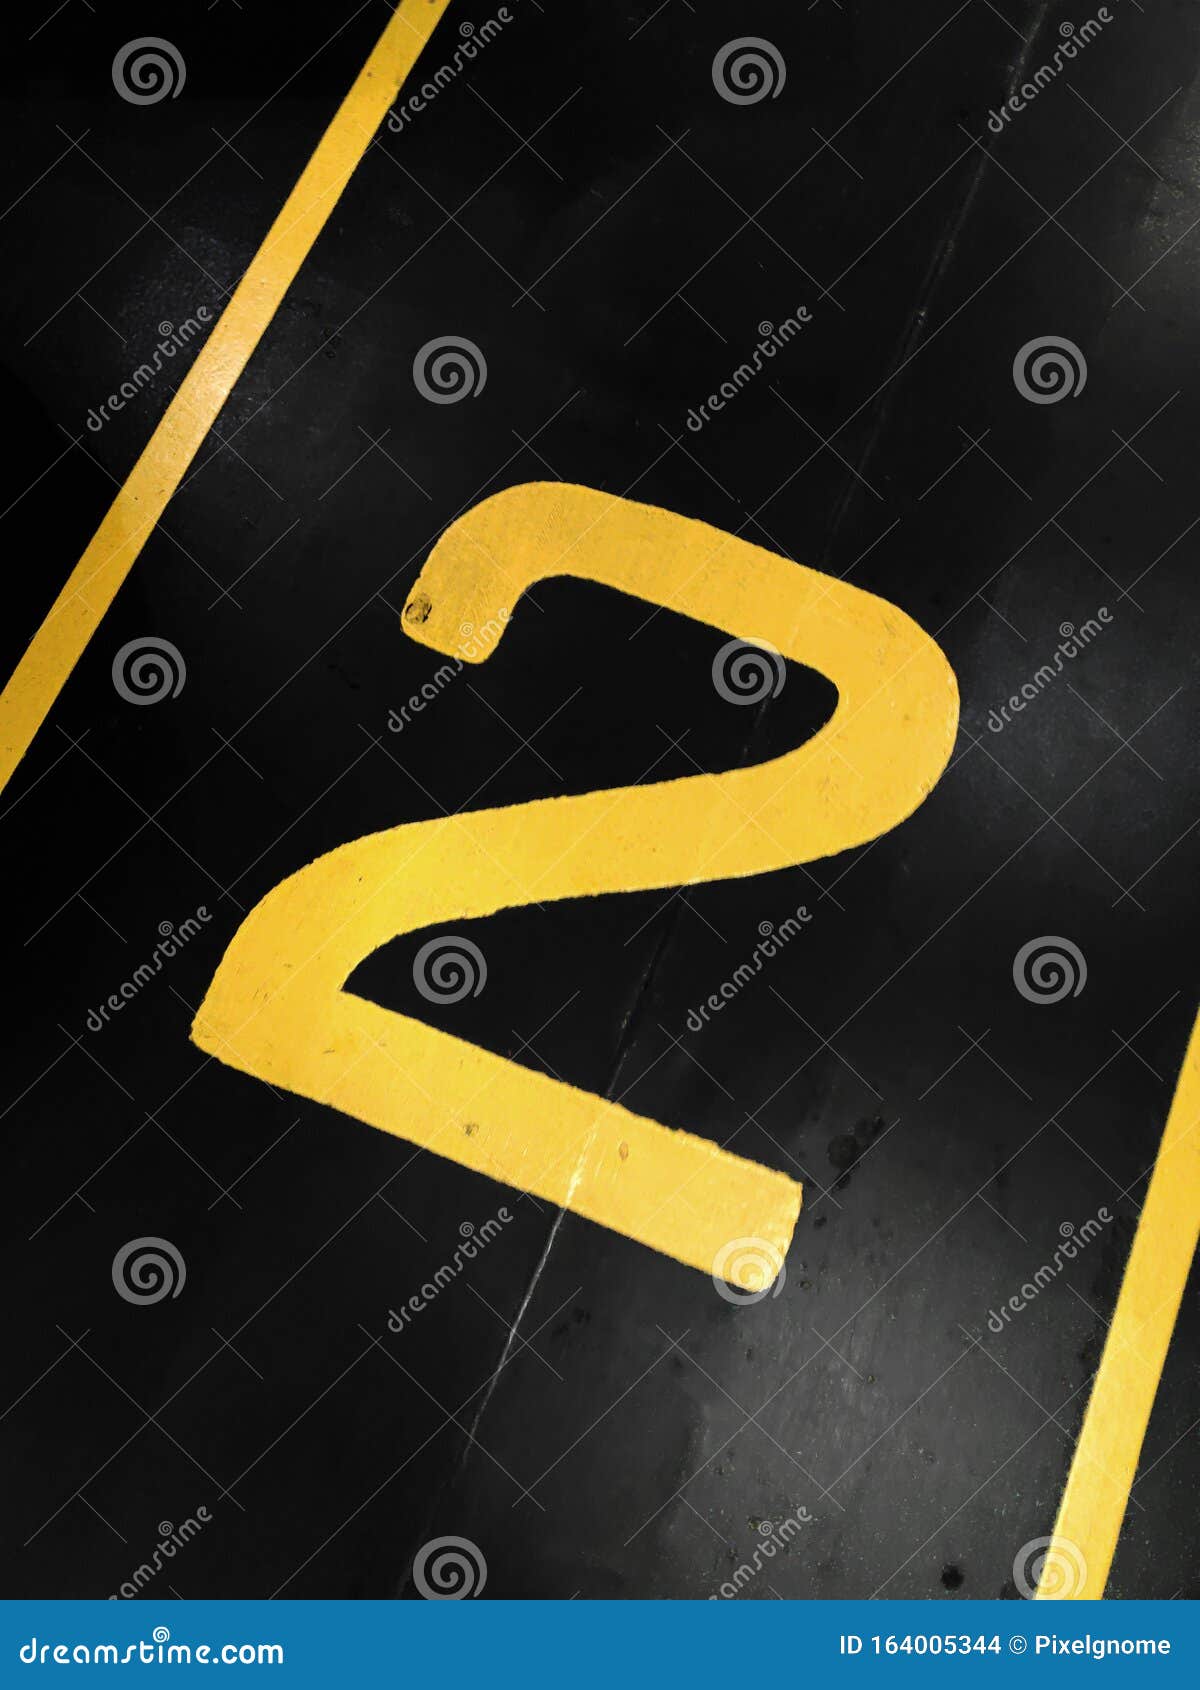 graphic yellow numbers painted on a stark black background